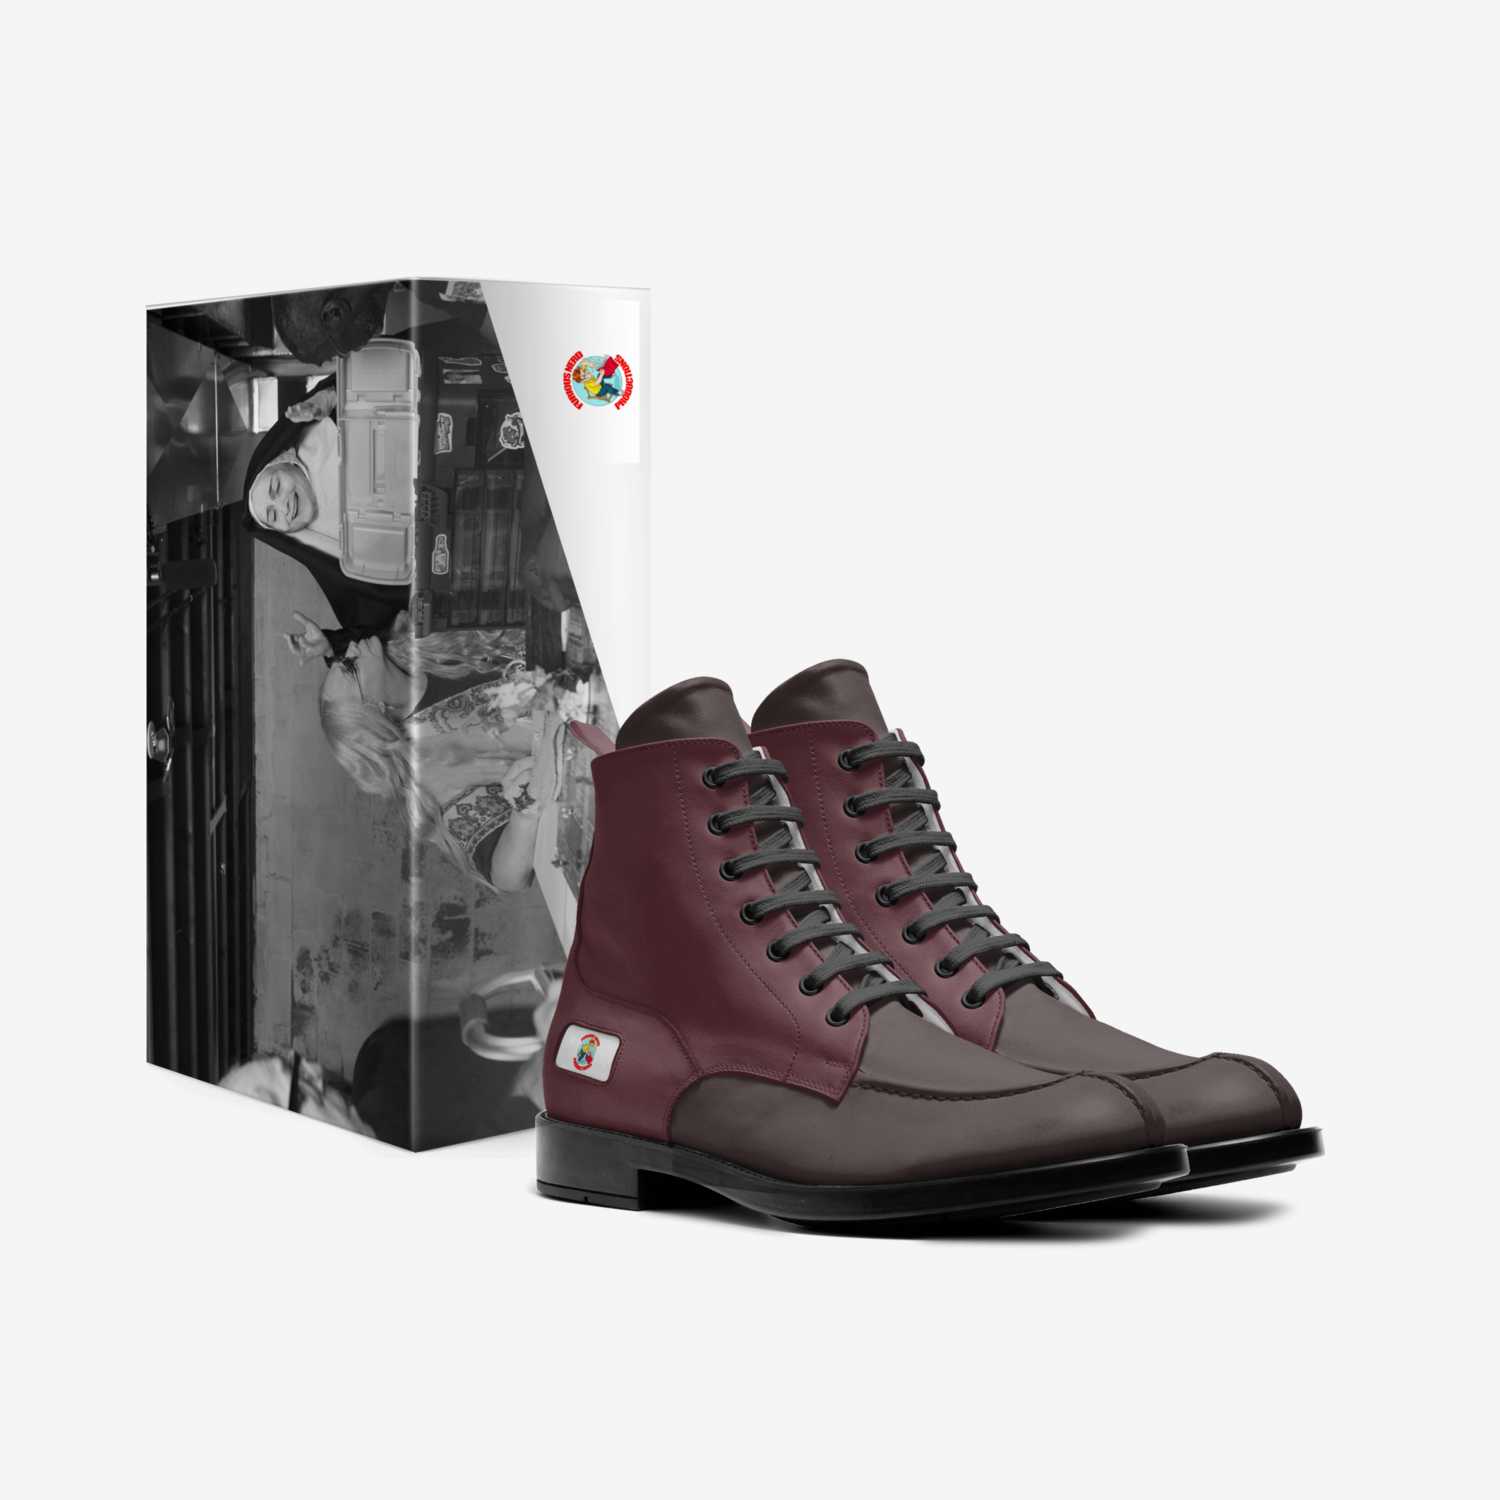 Jack Be Nimble custom made in Italy shoes by Steve Wollett | Box view